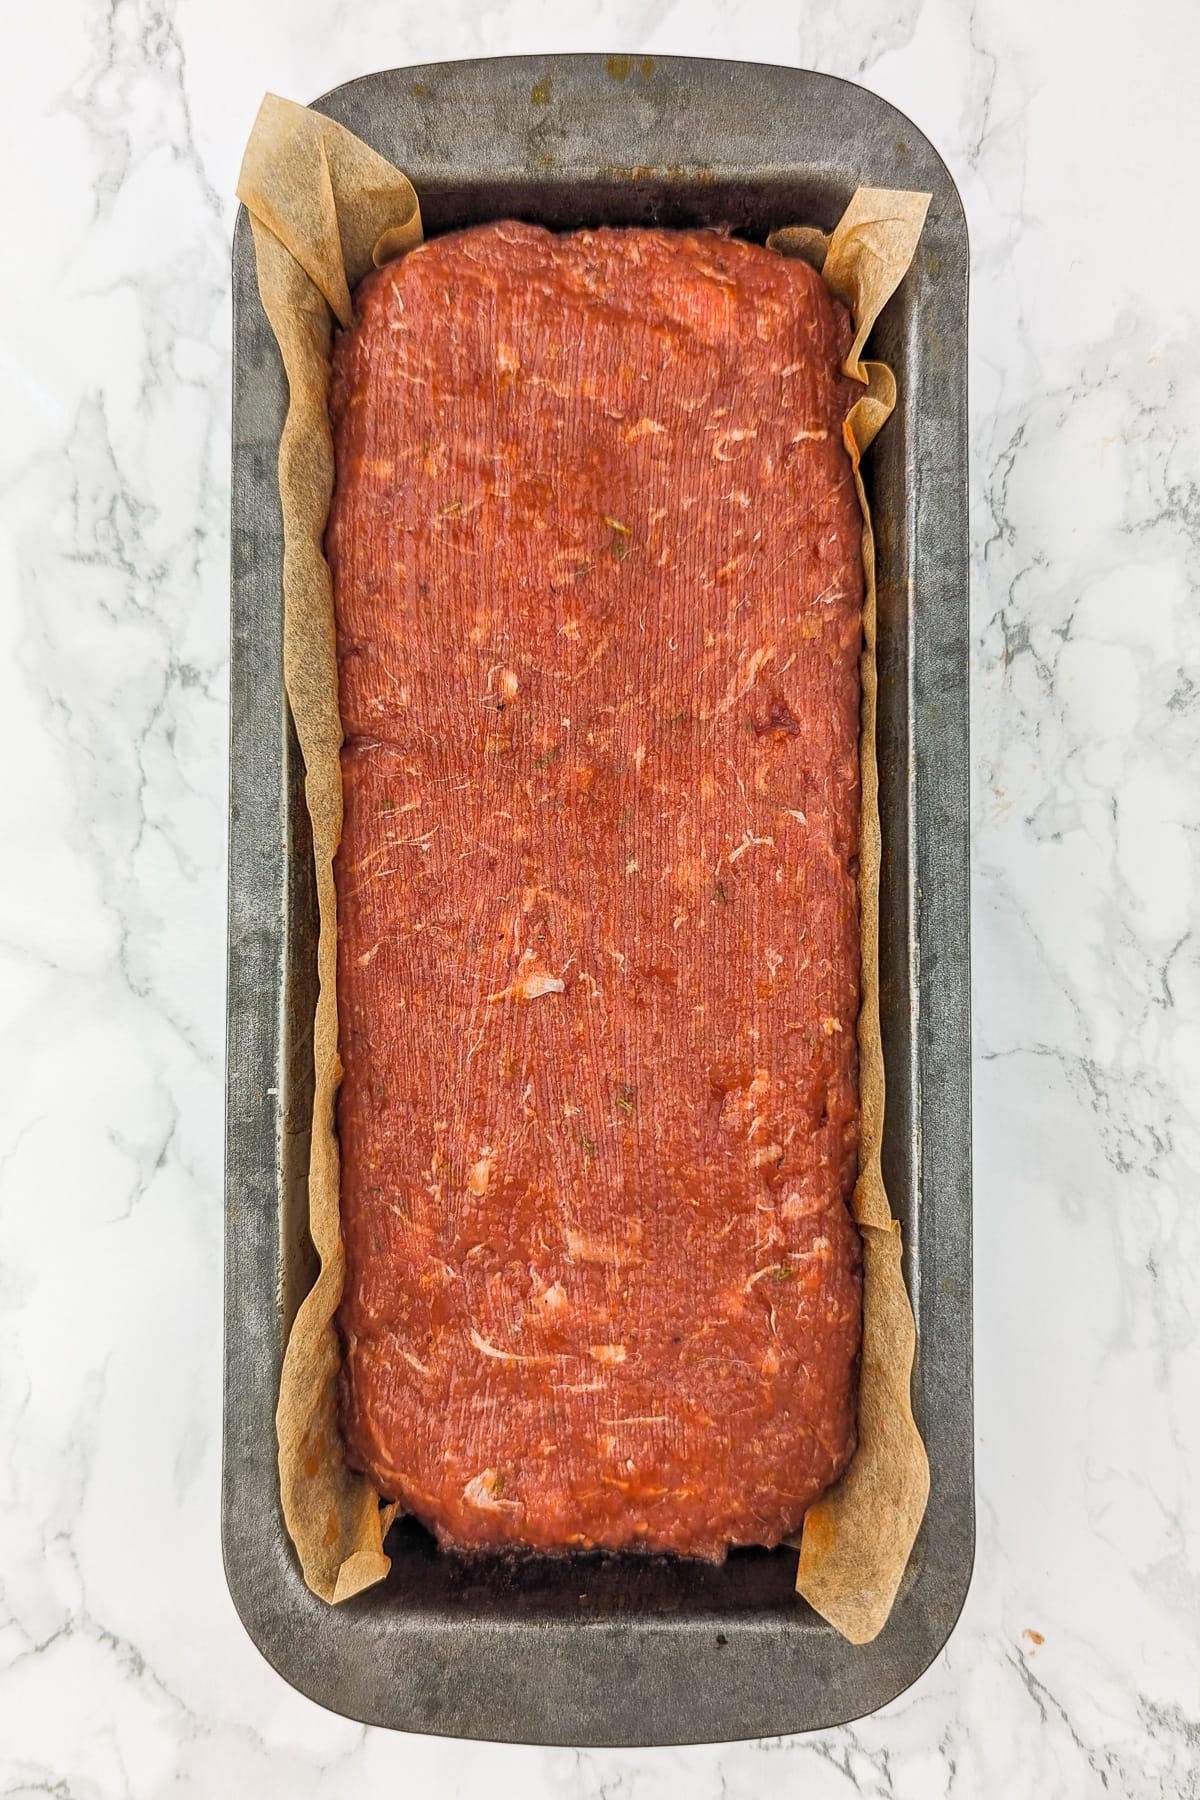 Top look of a raw meatloaf in a metal baking tray sitting on a white marble table.